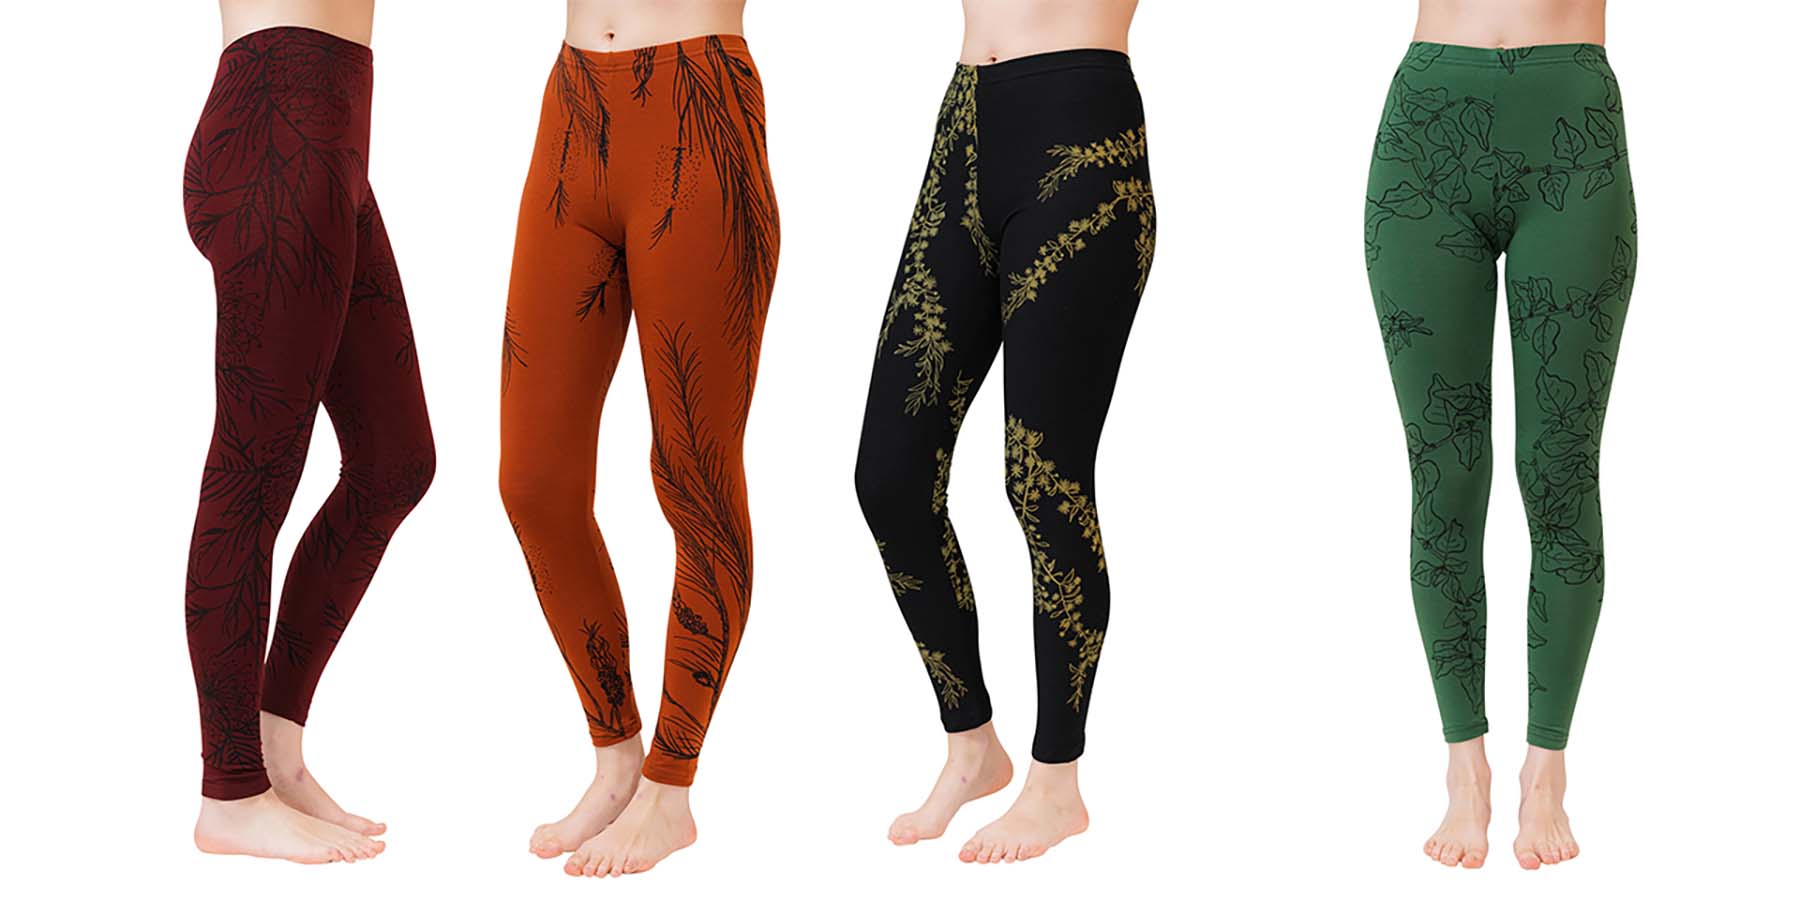 4 people with different merino leggings on, with different colours and prints.